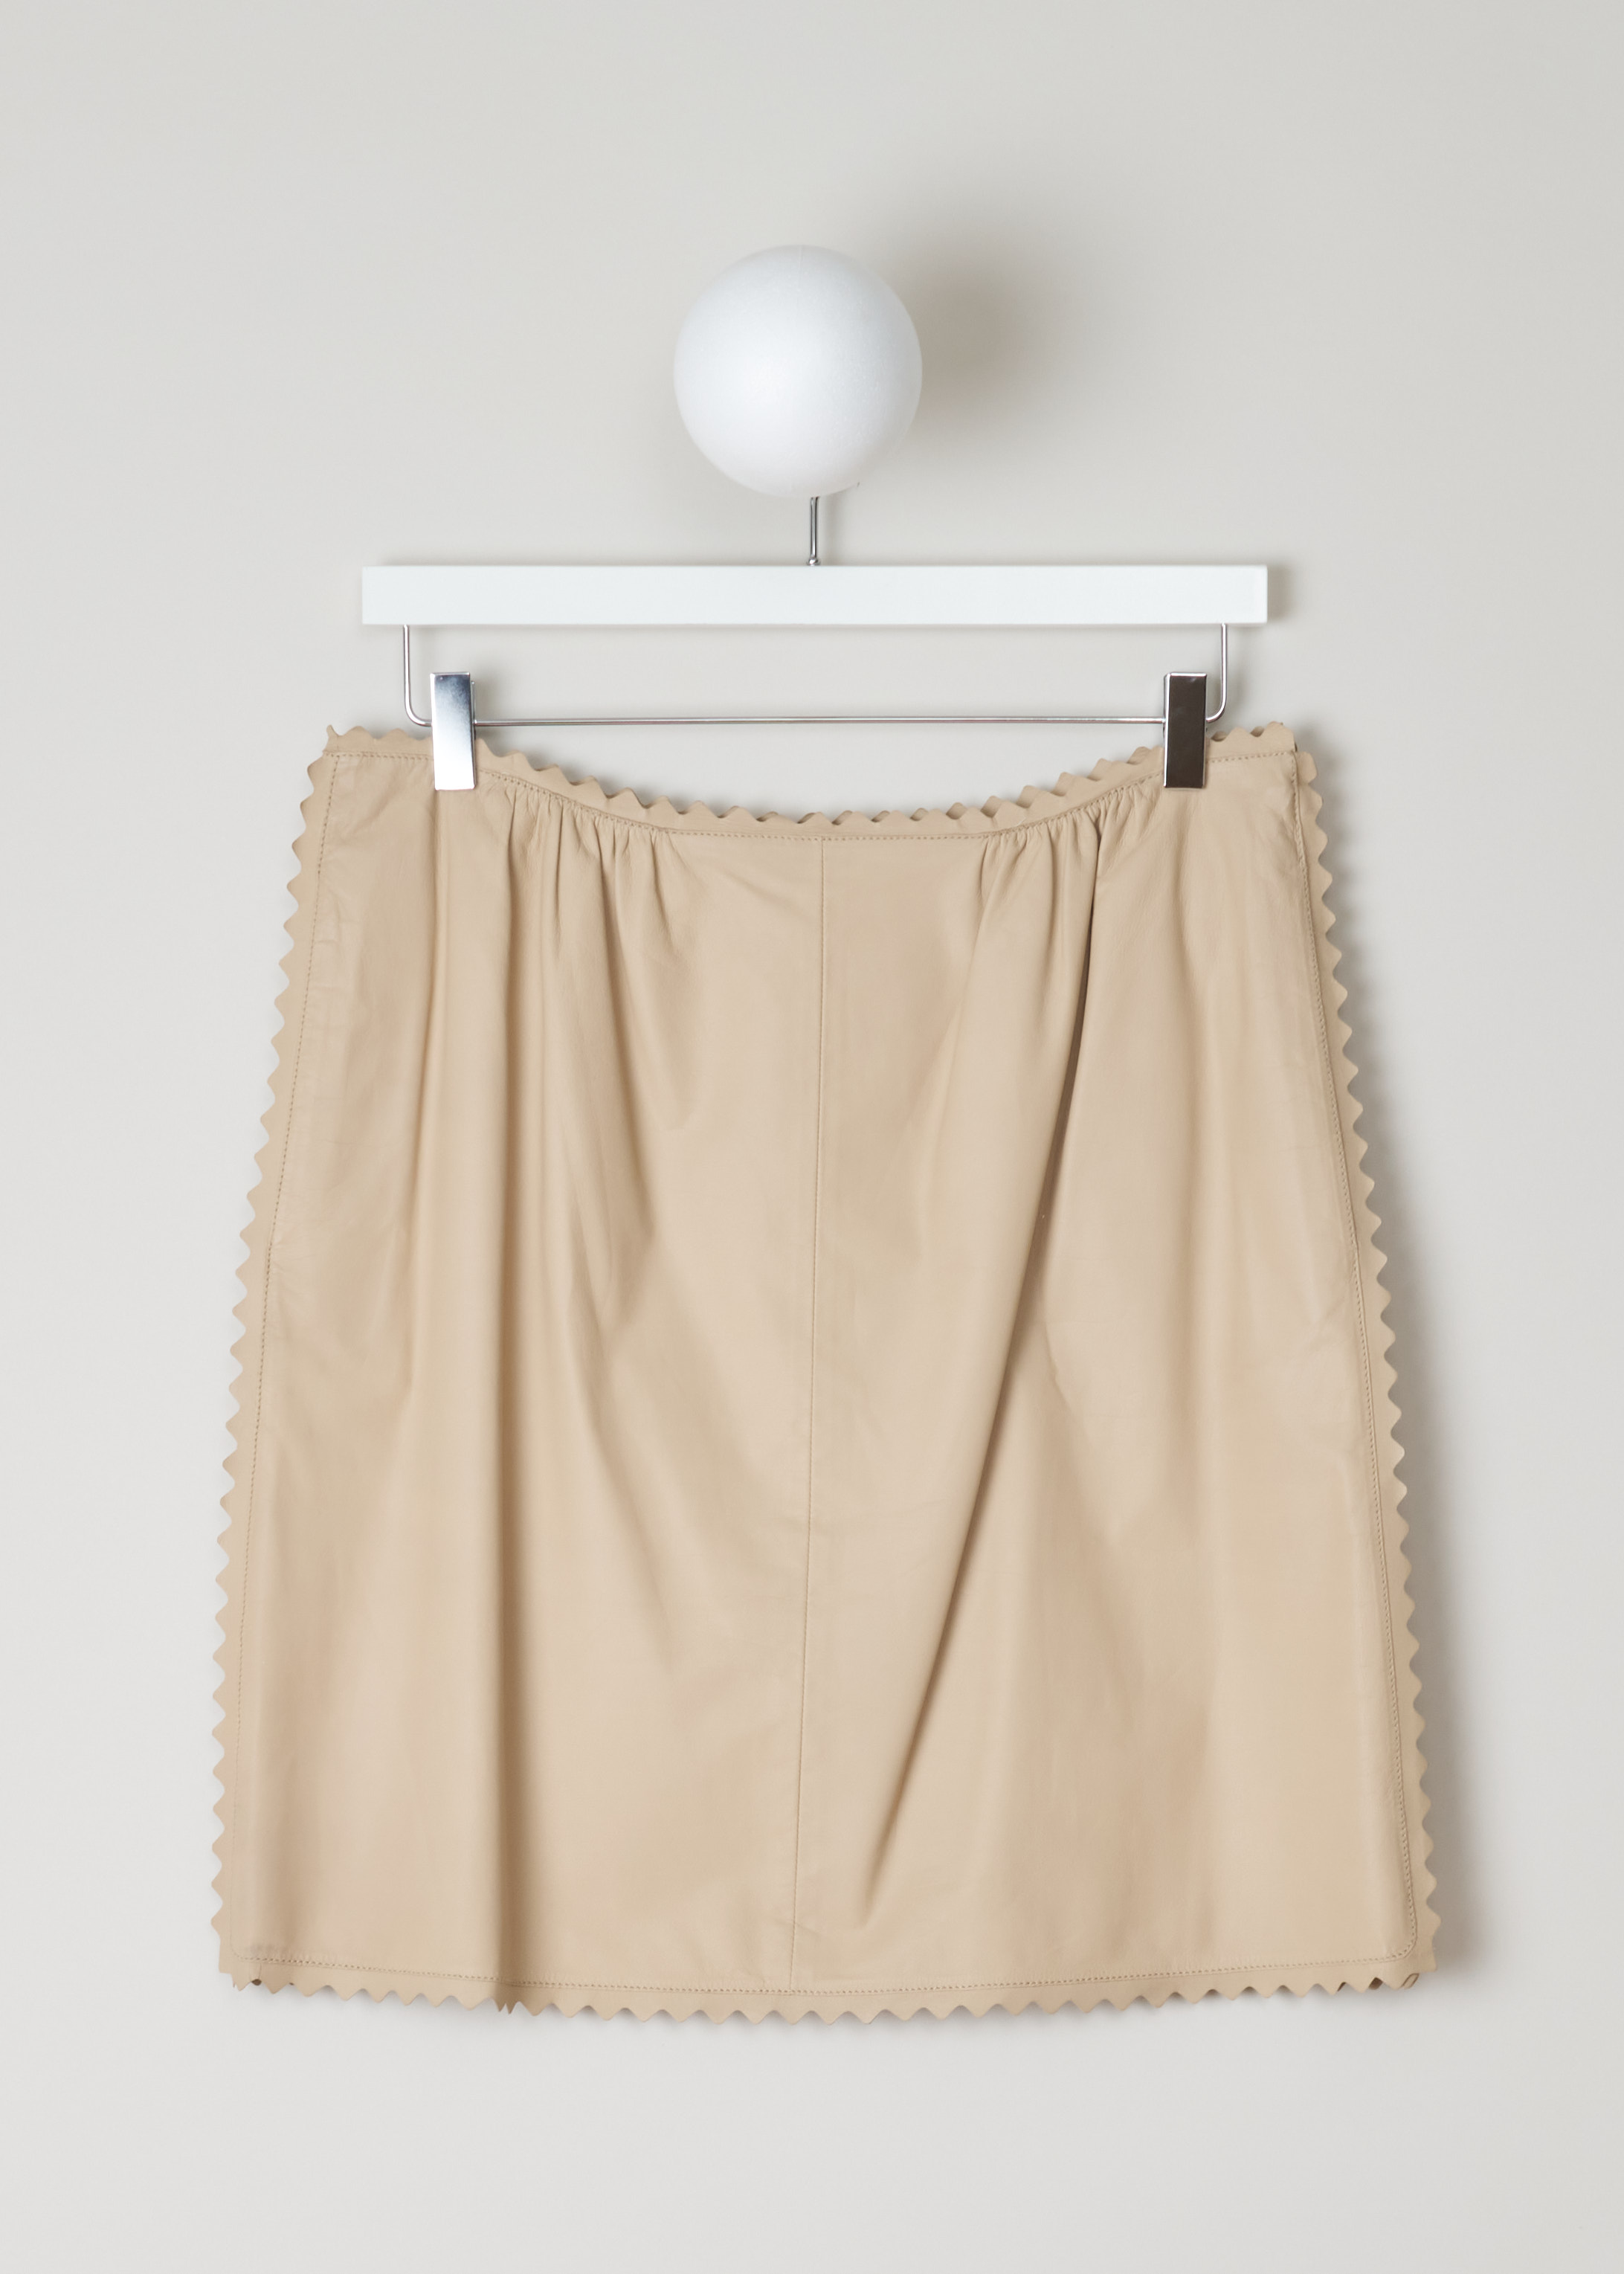 ChloÃ©, Beige leather skirt with frilled edges, 13SCJ03_13S204_ginger_beige, beige front. Calfskin crafted into a lovely skirt, coloured to a shade of beige, scalloped edges at hem, waist and side seam and. The fastening option can be found on the side seam.